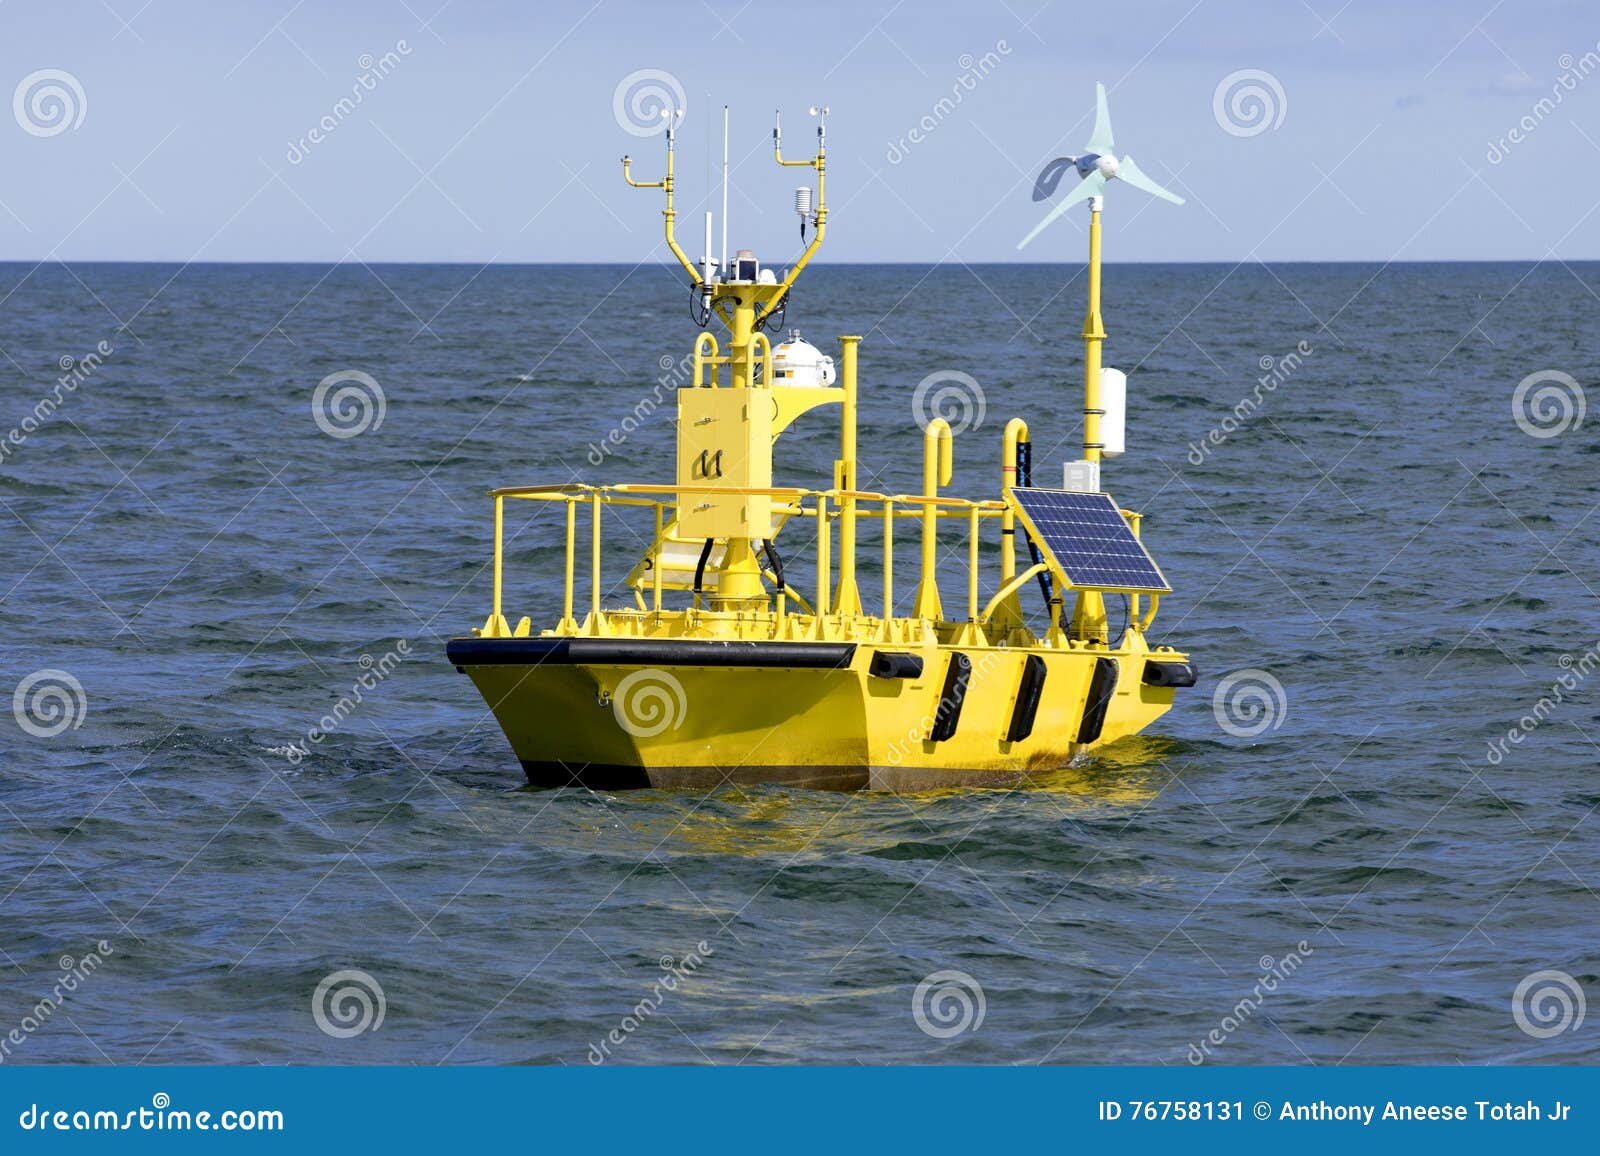 ocean weather research buoy